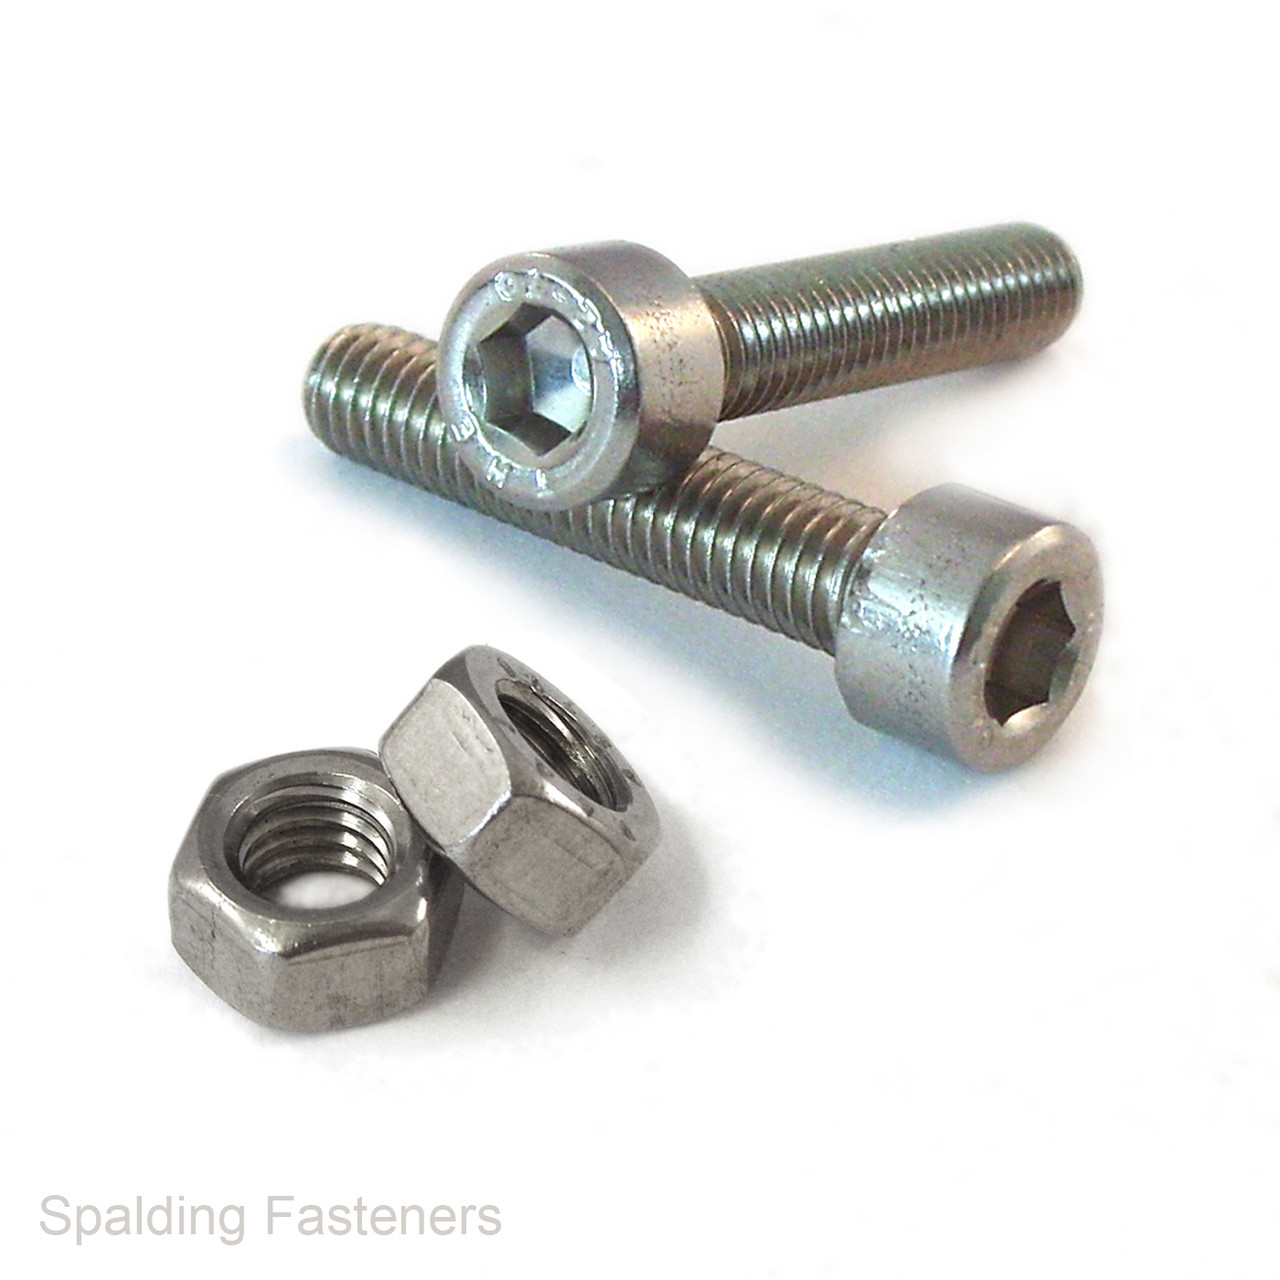 Assorted M3 Metric Stainless Socket Cap Screws, Nuts & Washers